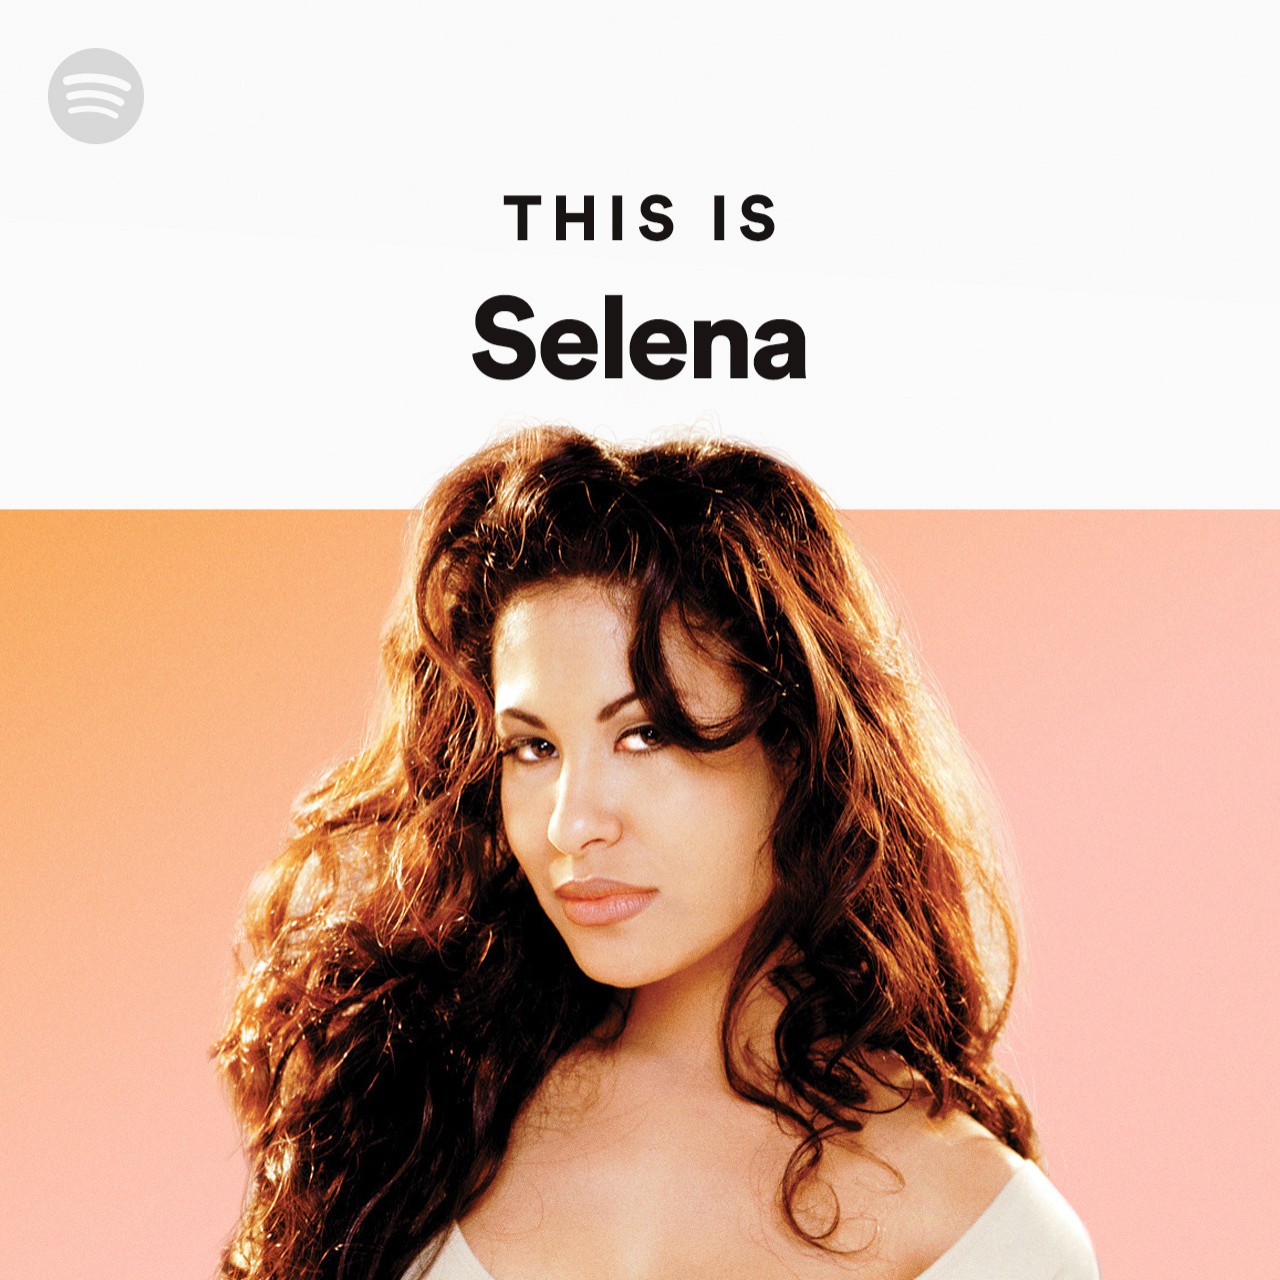 This Is Selena by spotify Spotify Playlist